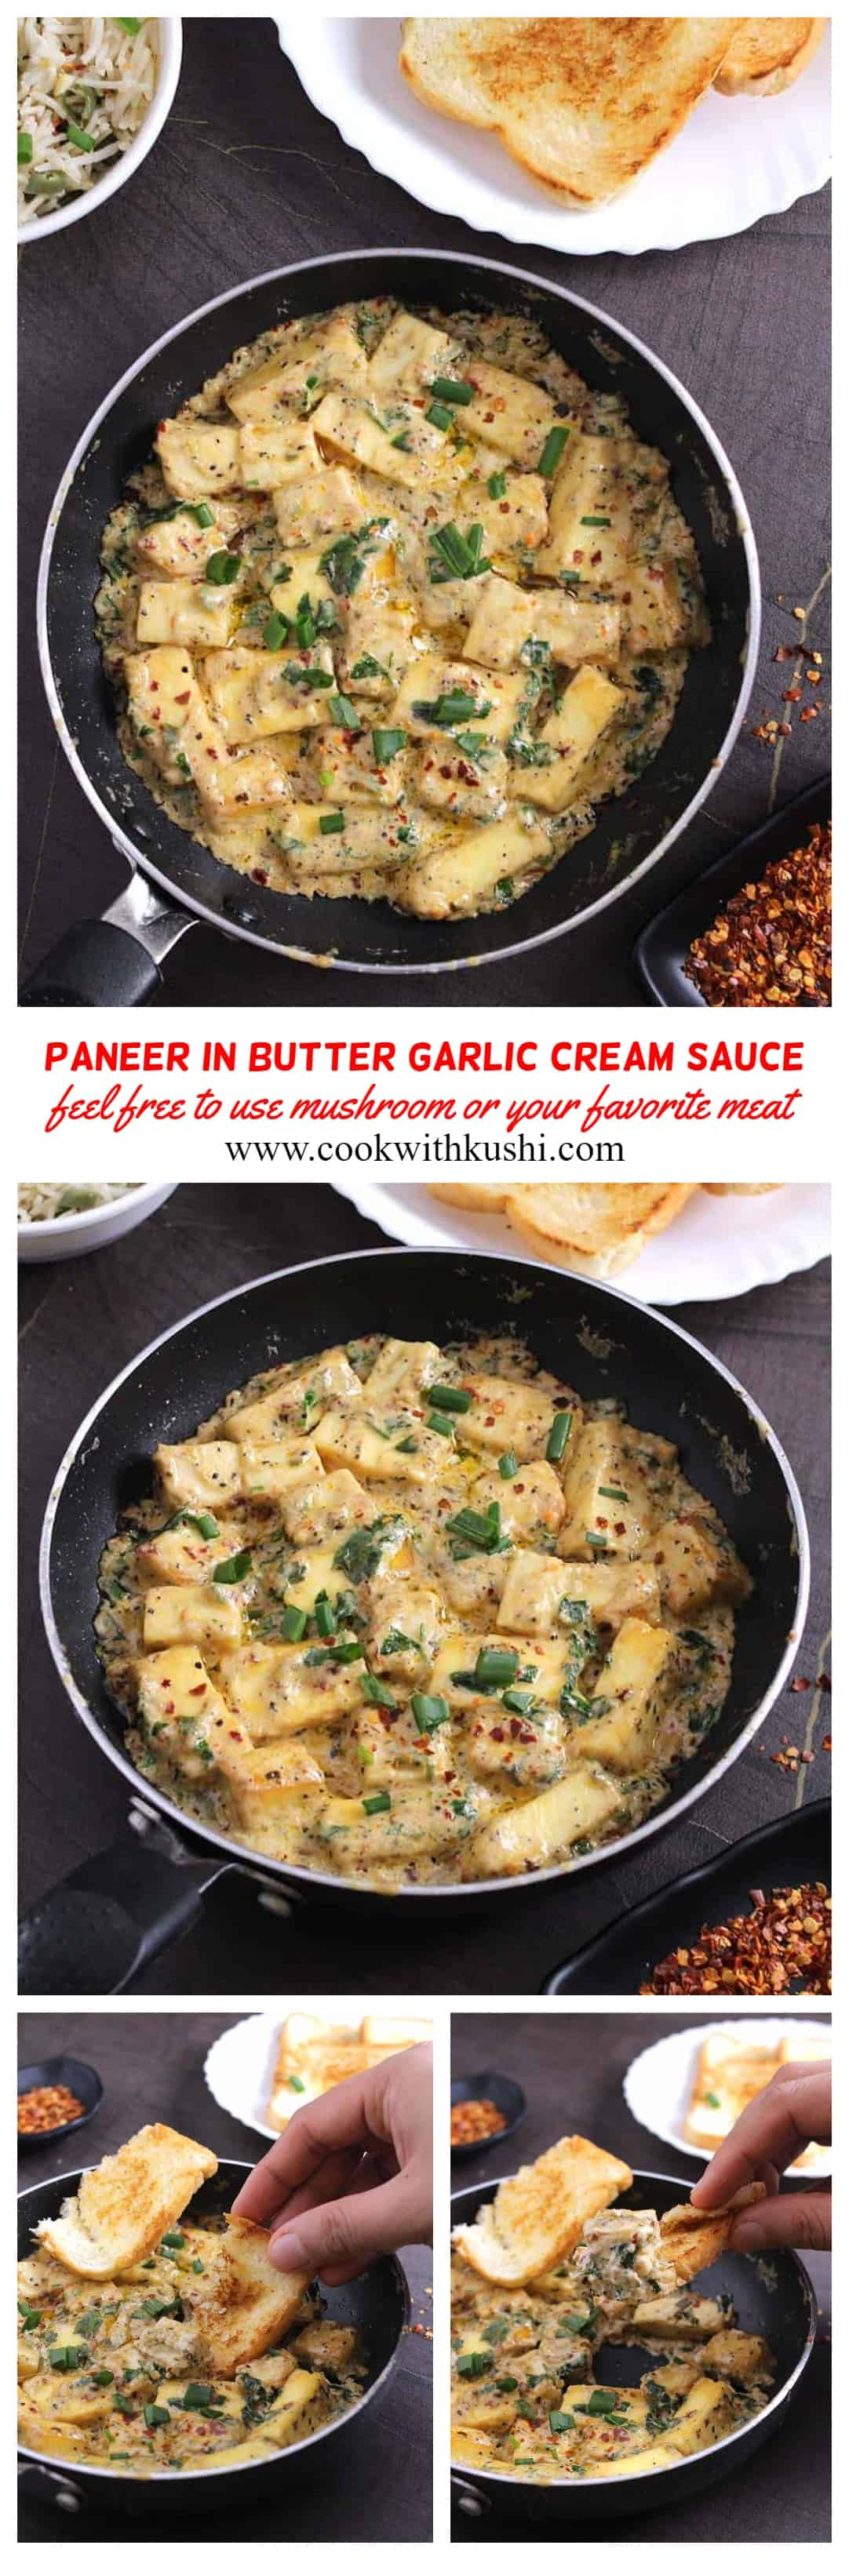 Paneer in Butter Garlic Cream sauce is rich and classic, garlicky, quick and easy to make recipe that can be prepared in less than 25 minutes. #garlicsauce #Creamsauce #garlicbutter #Mushroom #steak #salmon #shrimp